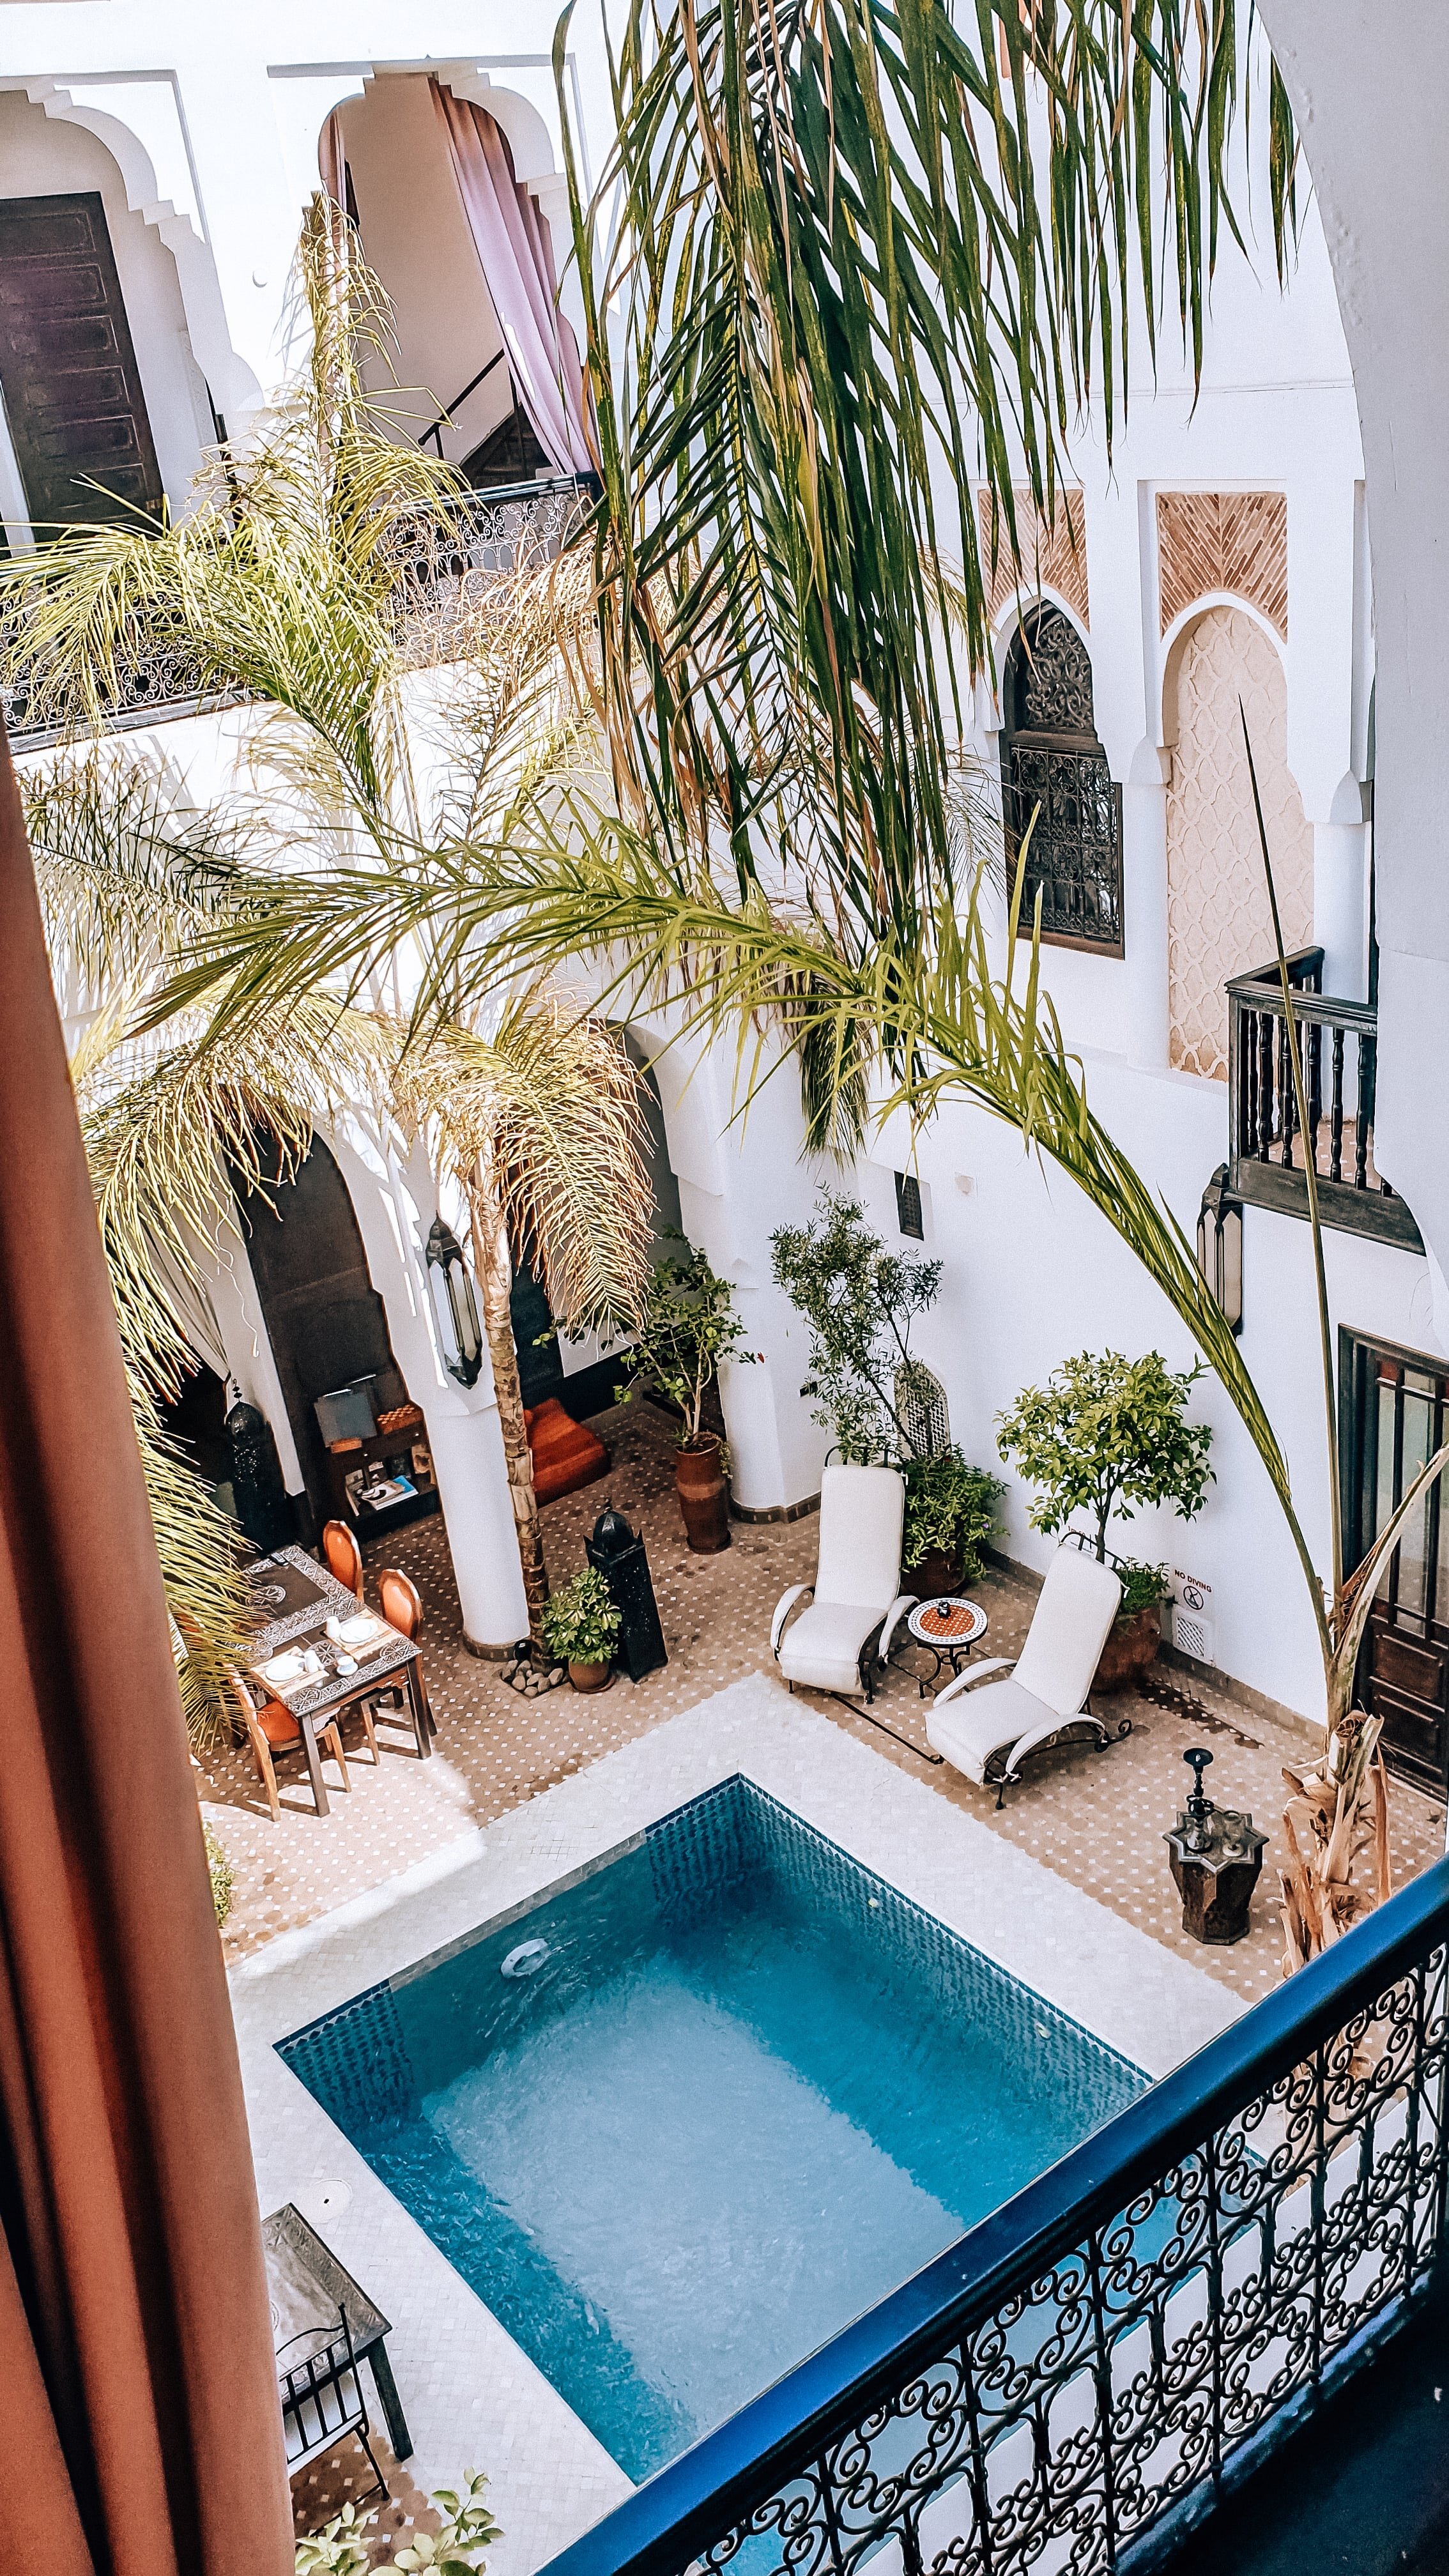 How to pick the best riad to stay at in Marrakech (split by budget)